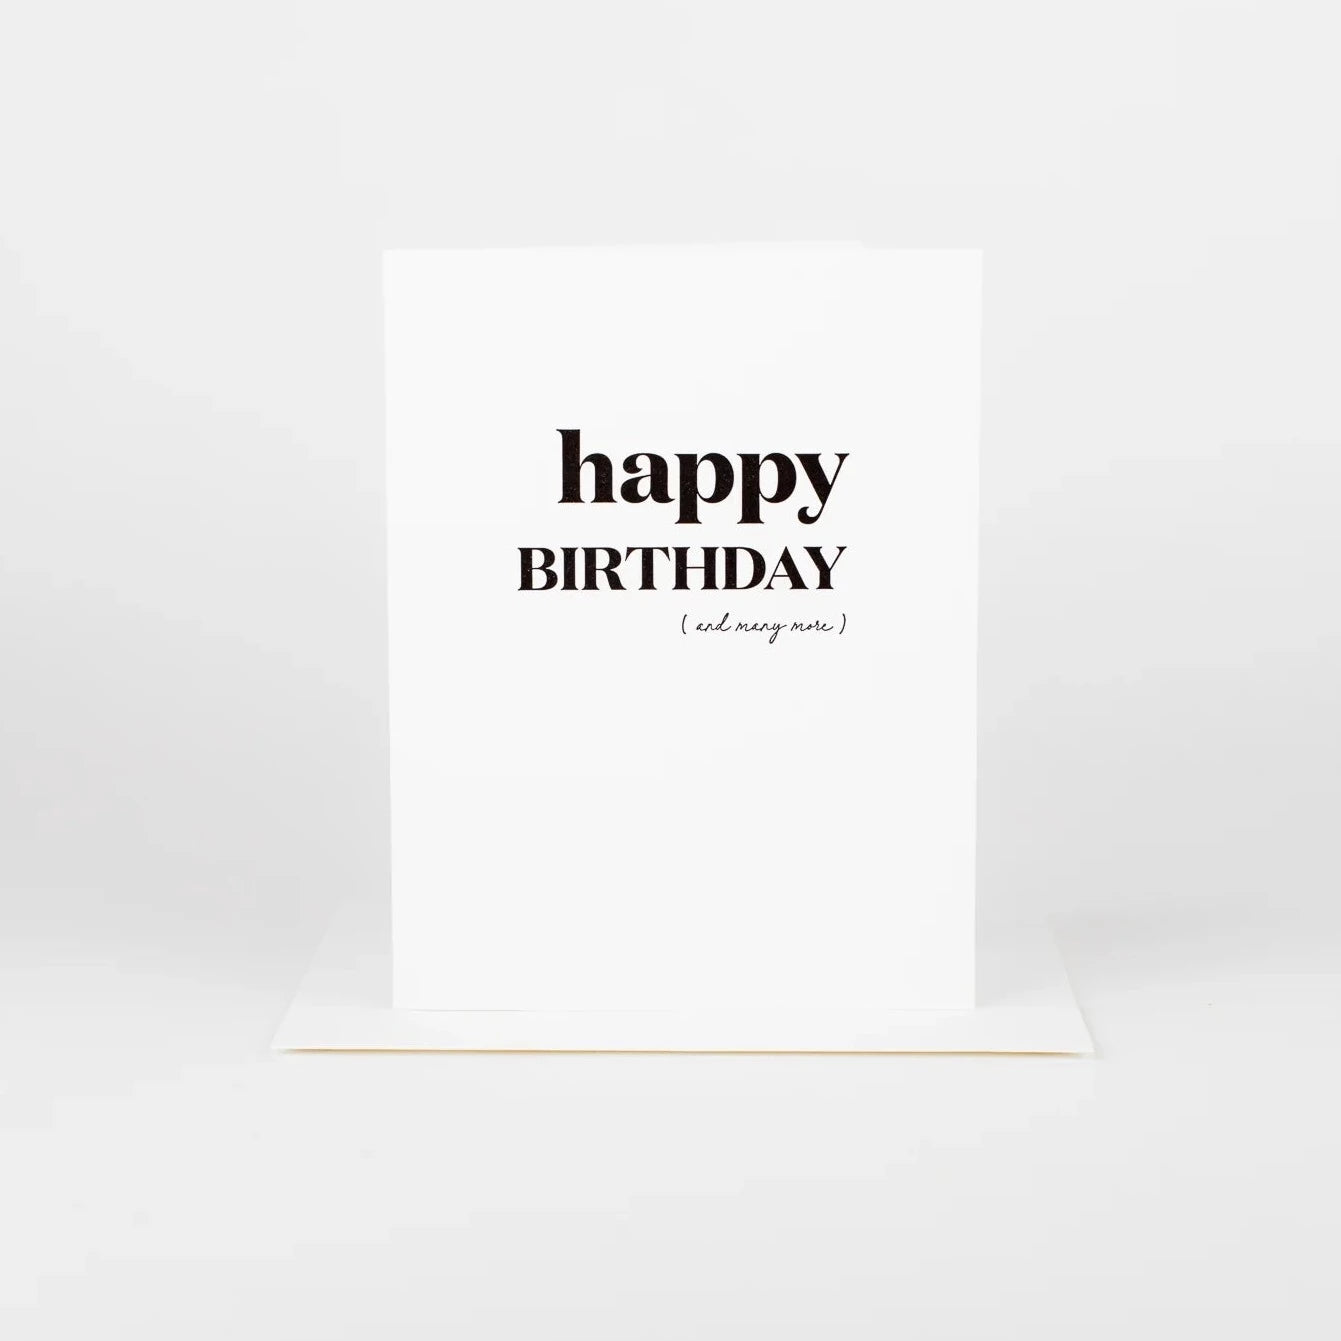 Happy Birthday (and many more) - Card